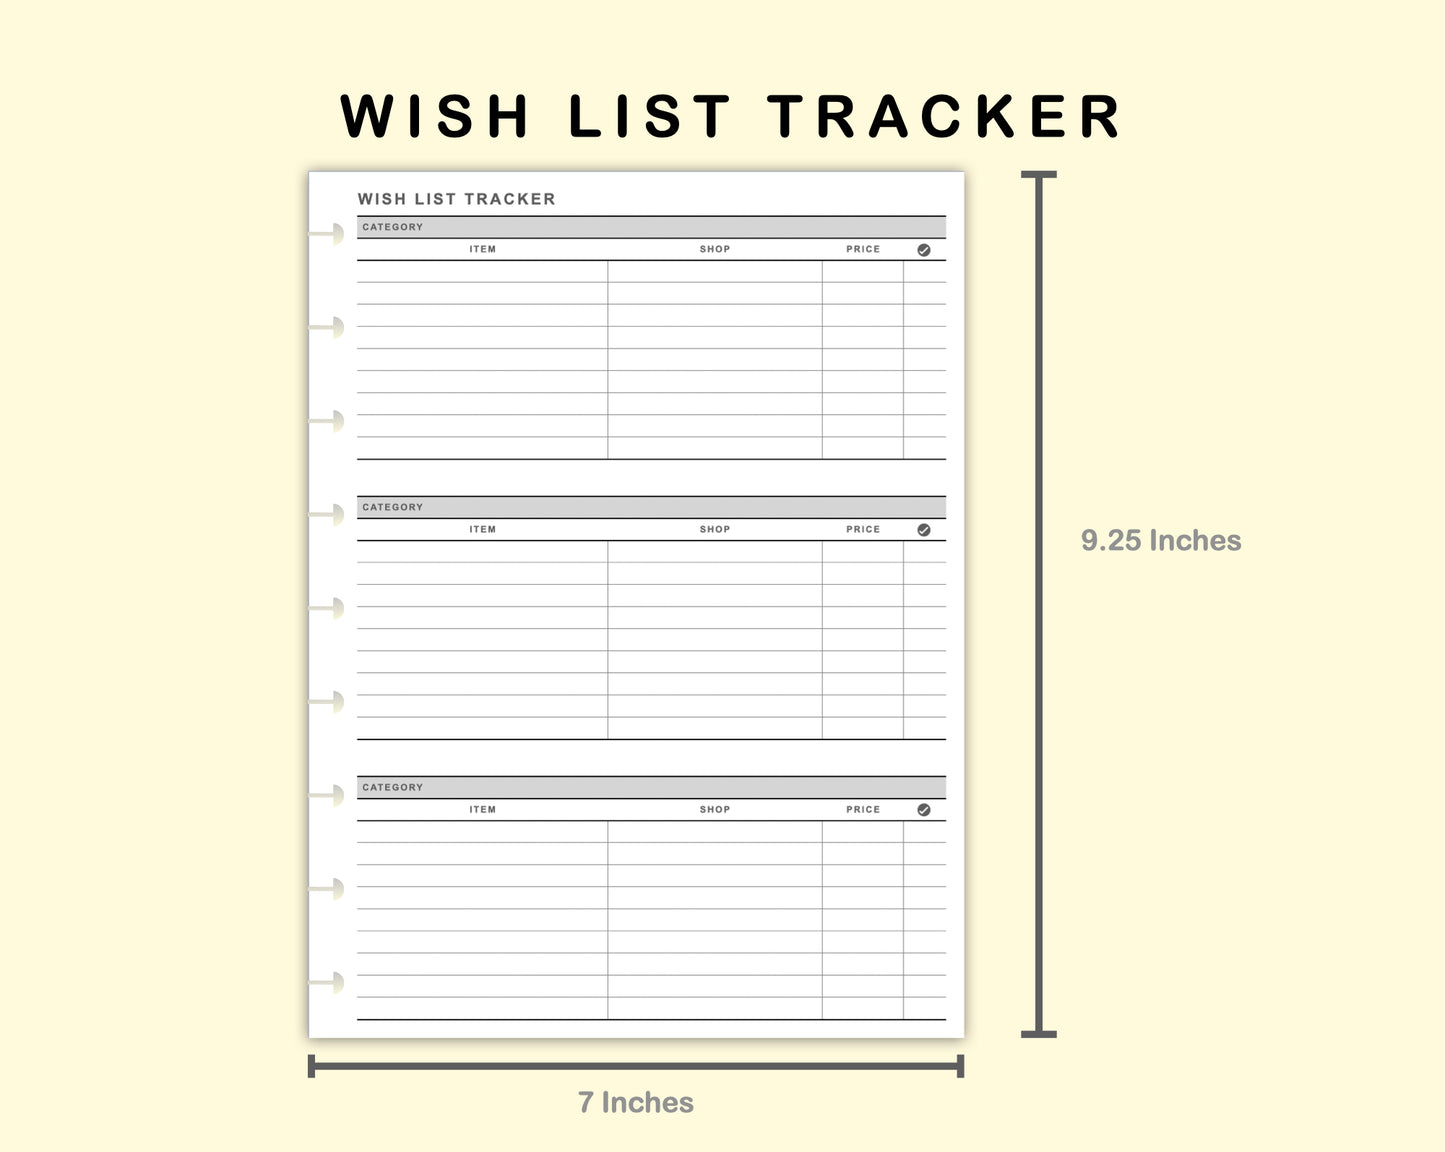 Classic HP Inserts - Wish List Tracker by Category